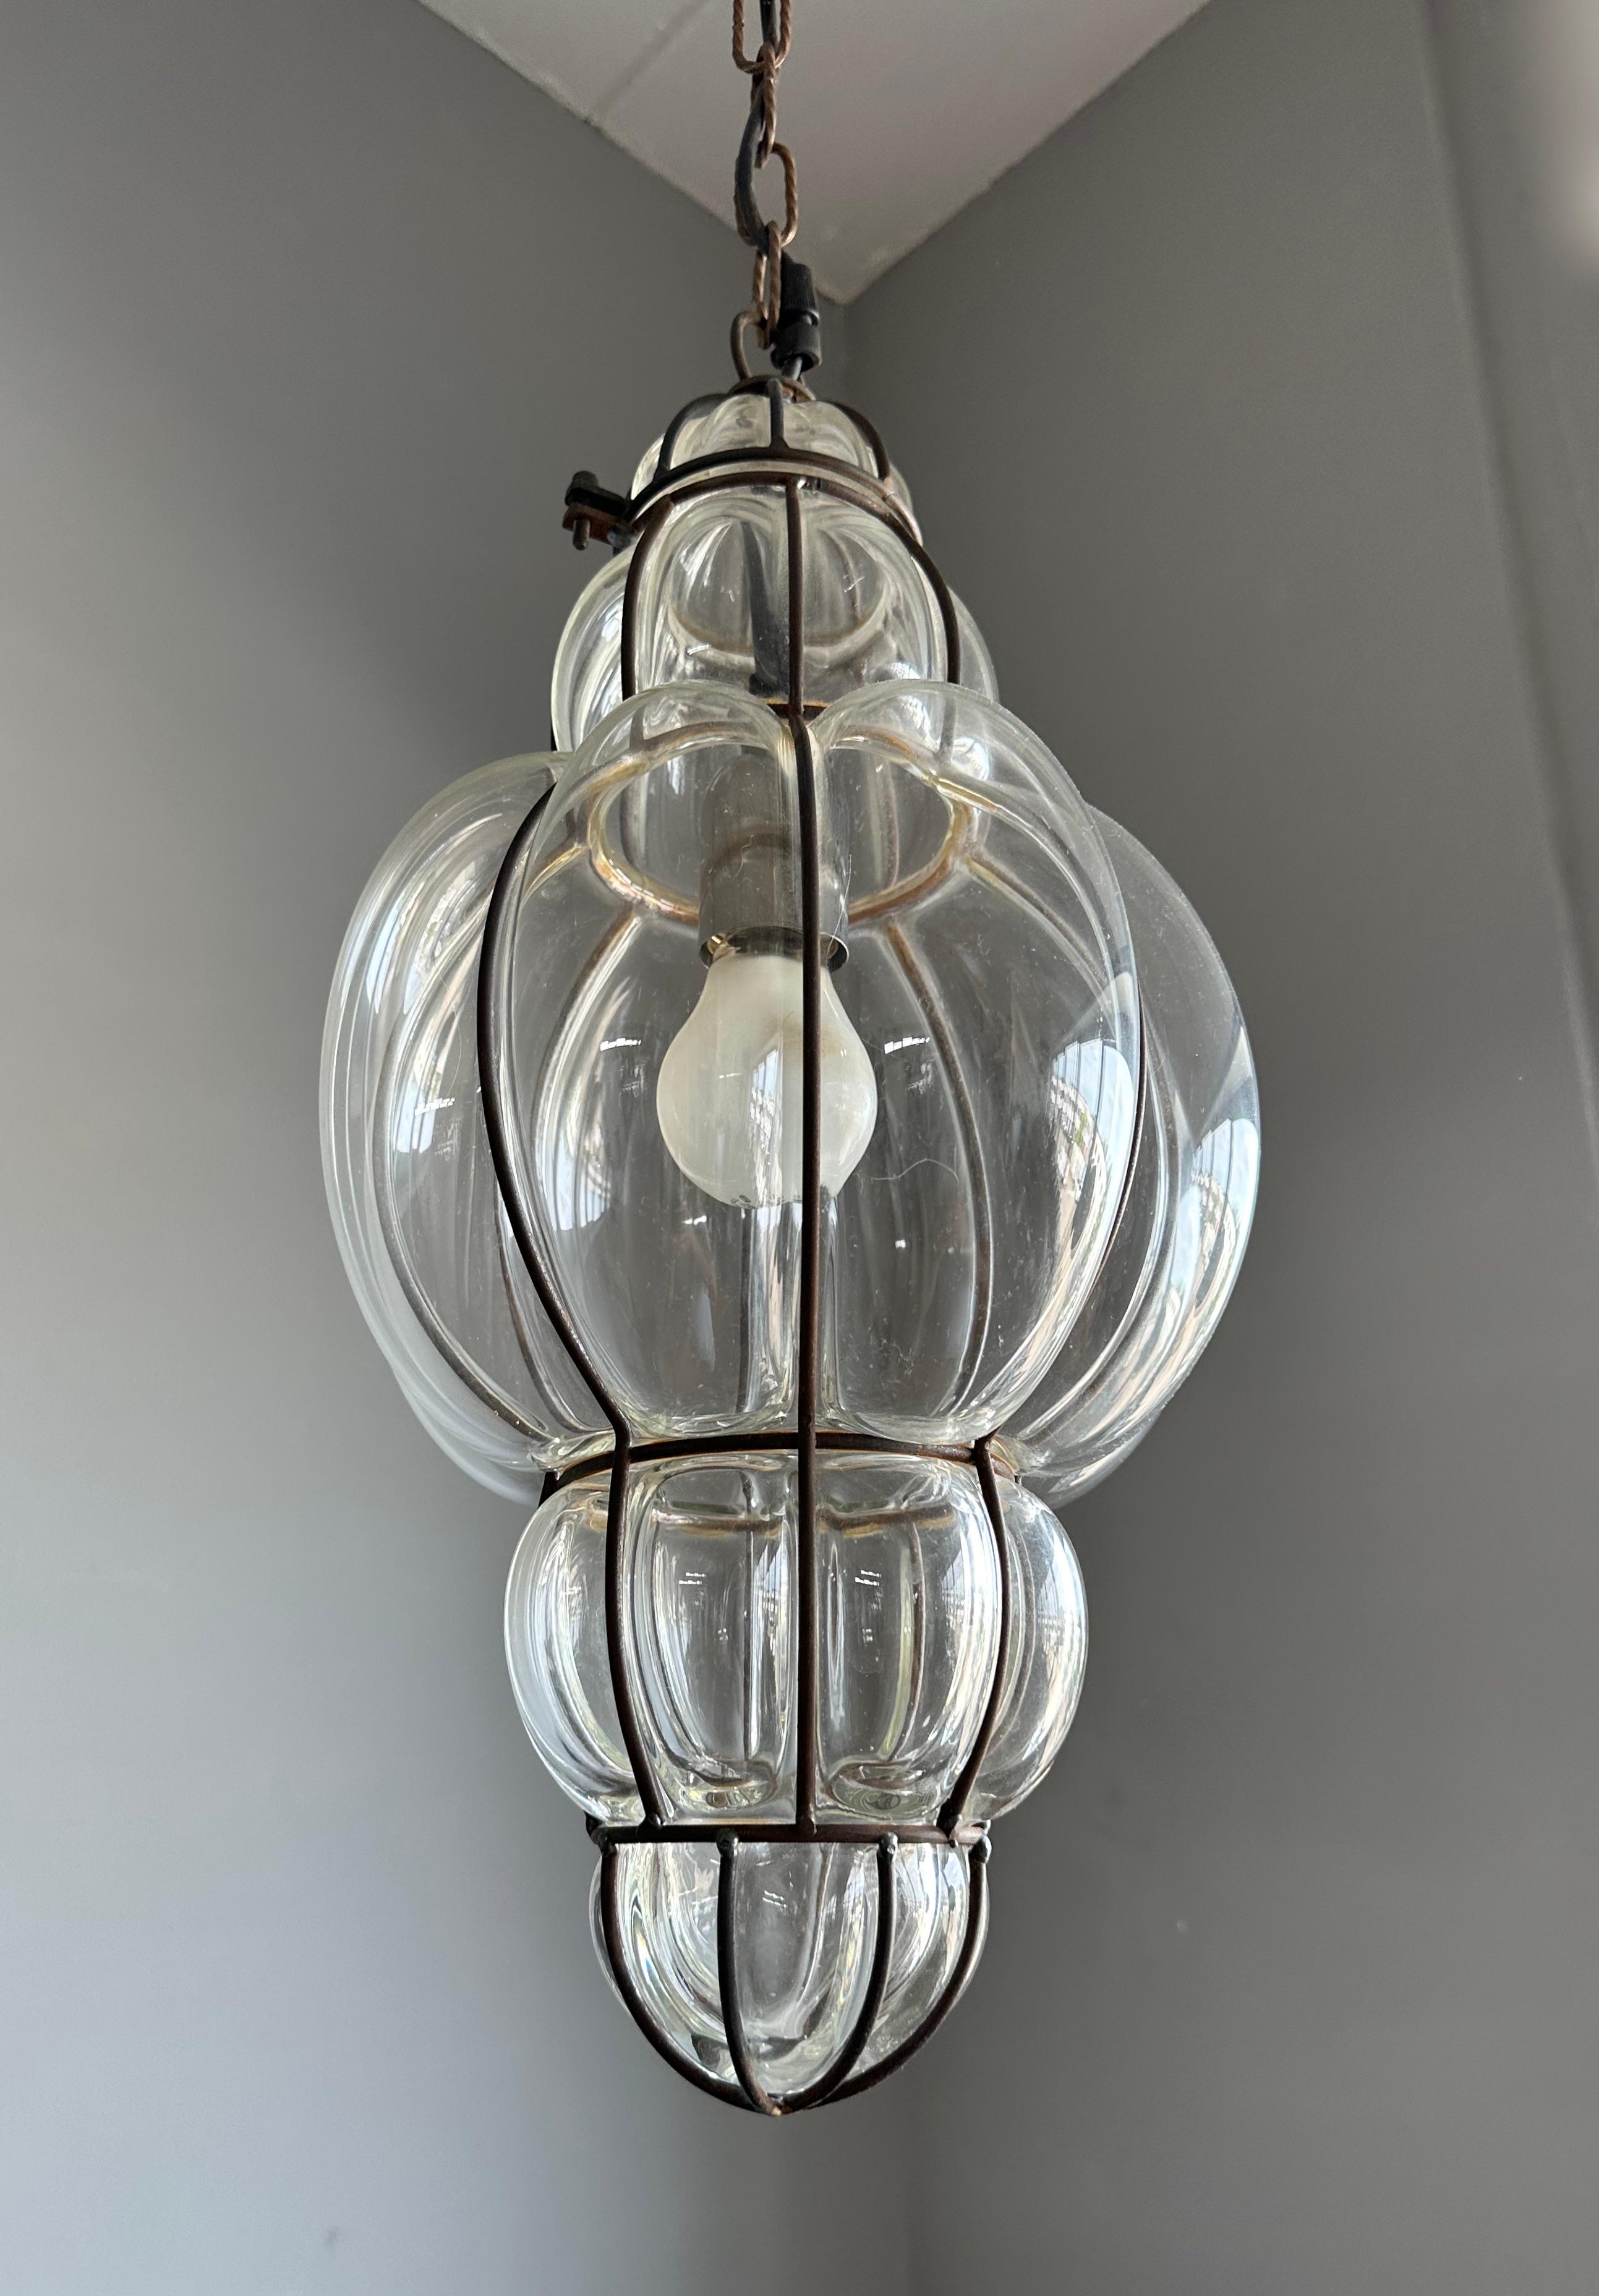 Victorian Great Shape Venetian Mouth Blown Glass in Hand Knotted Metal Frame Pendant Light For Sale